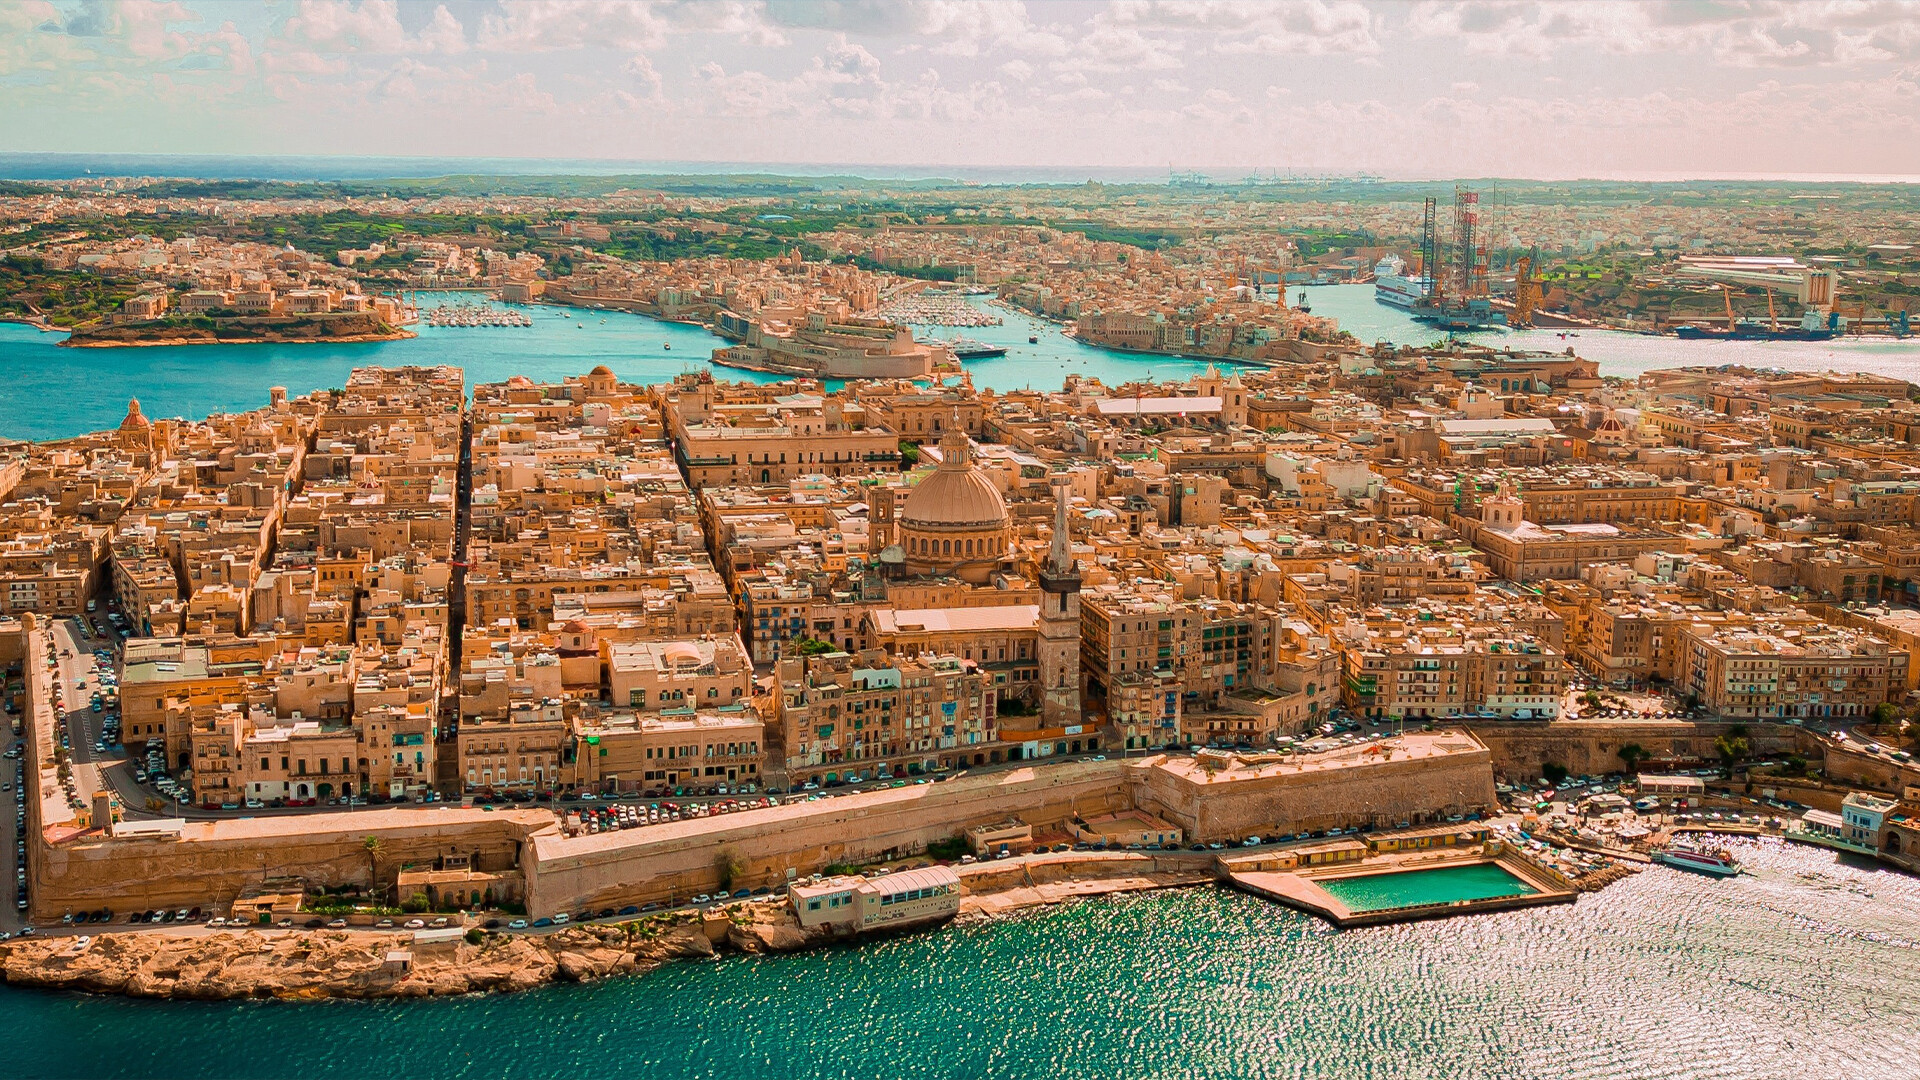 Top 10 attractions to visit in Valletta